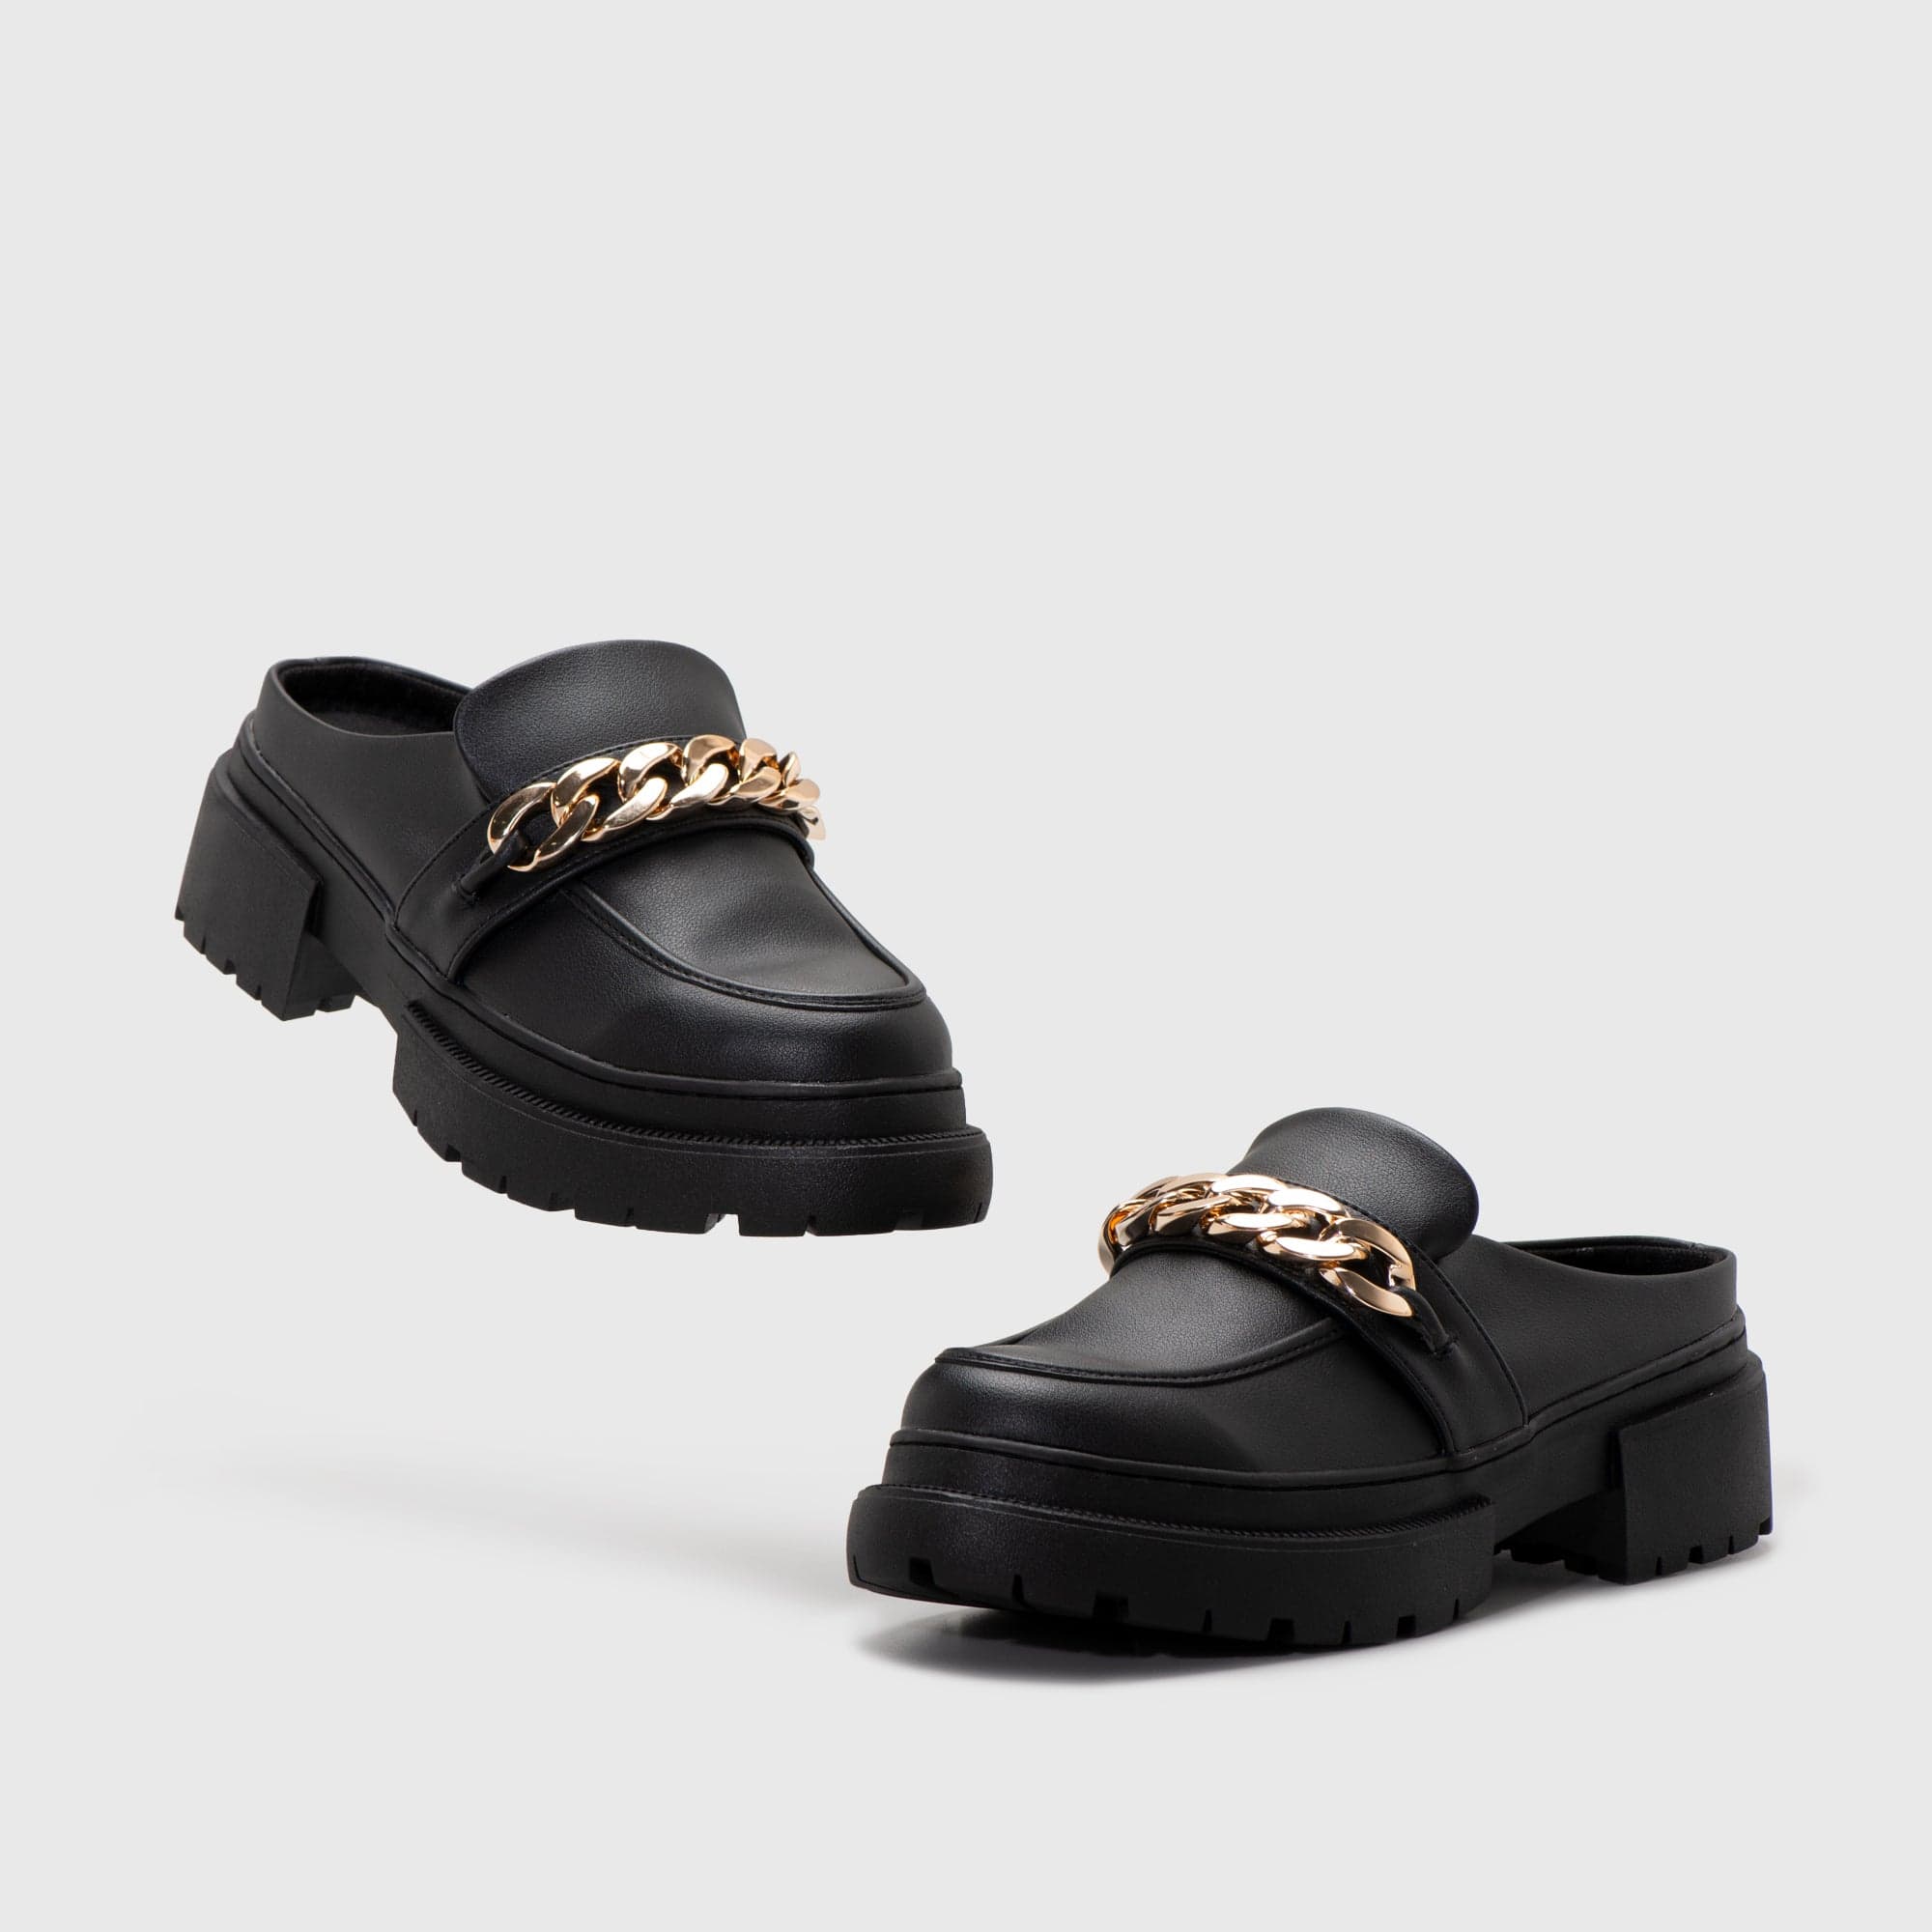 Adorable Projects Official Adorableprojects - Alesha Mules Black - Sandal Wanita